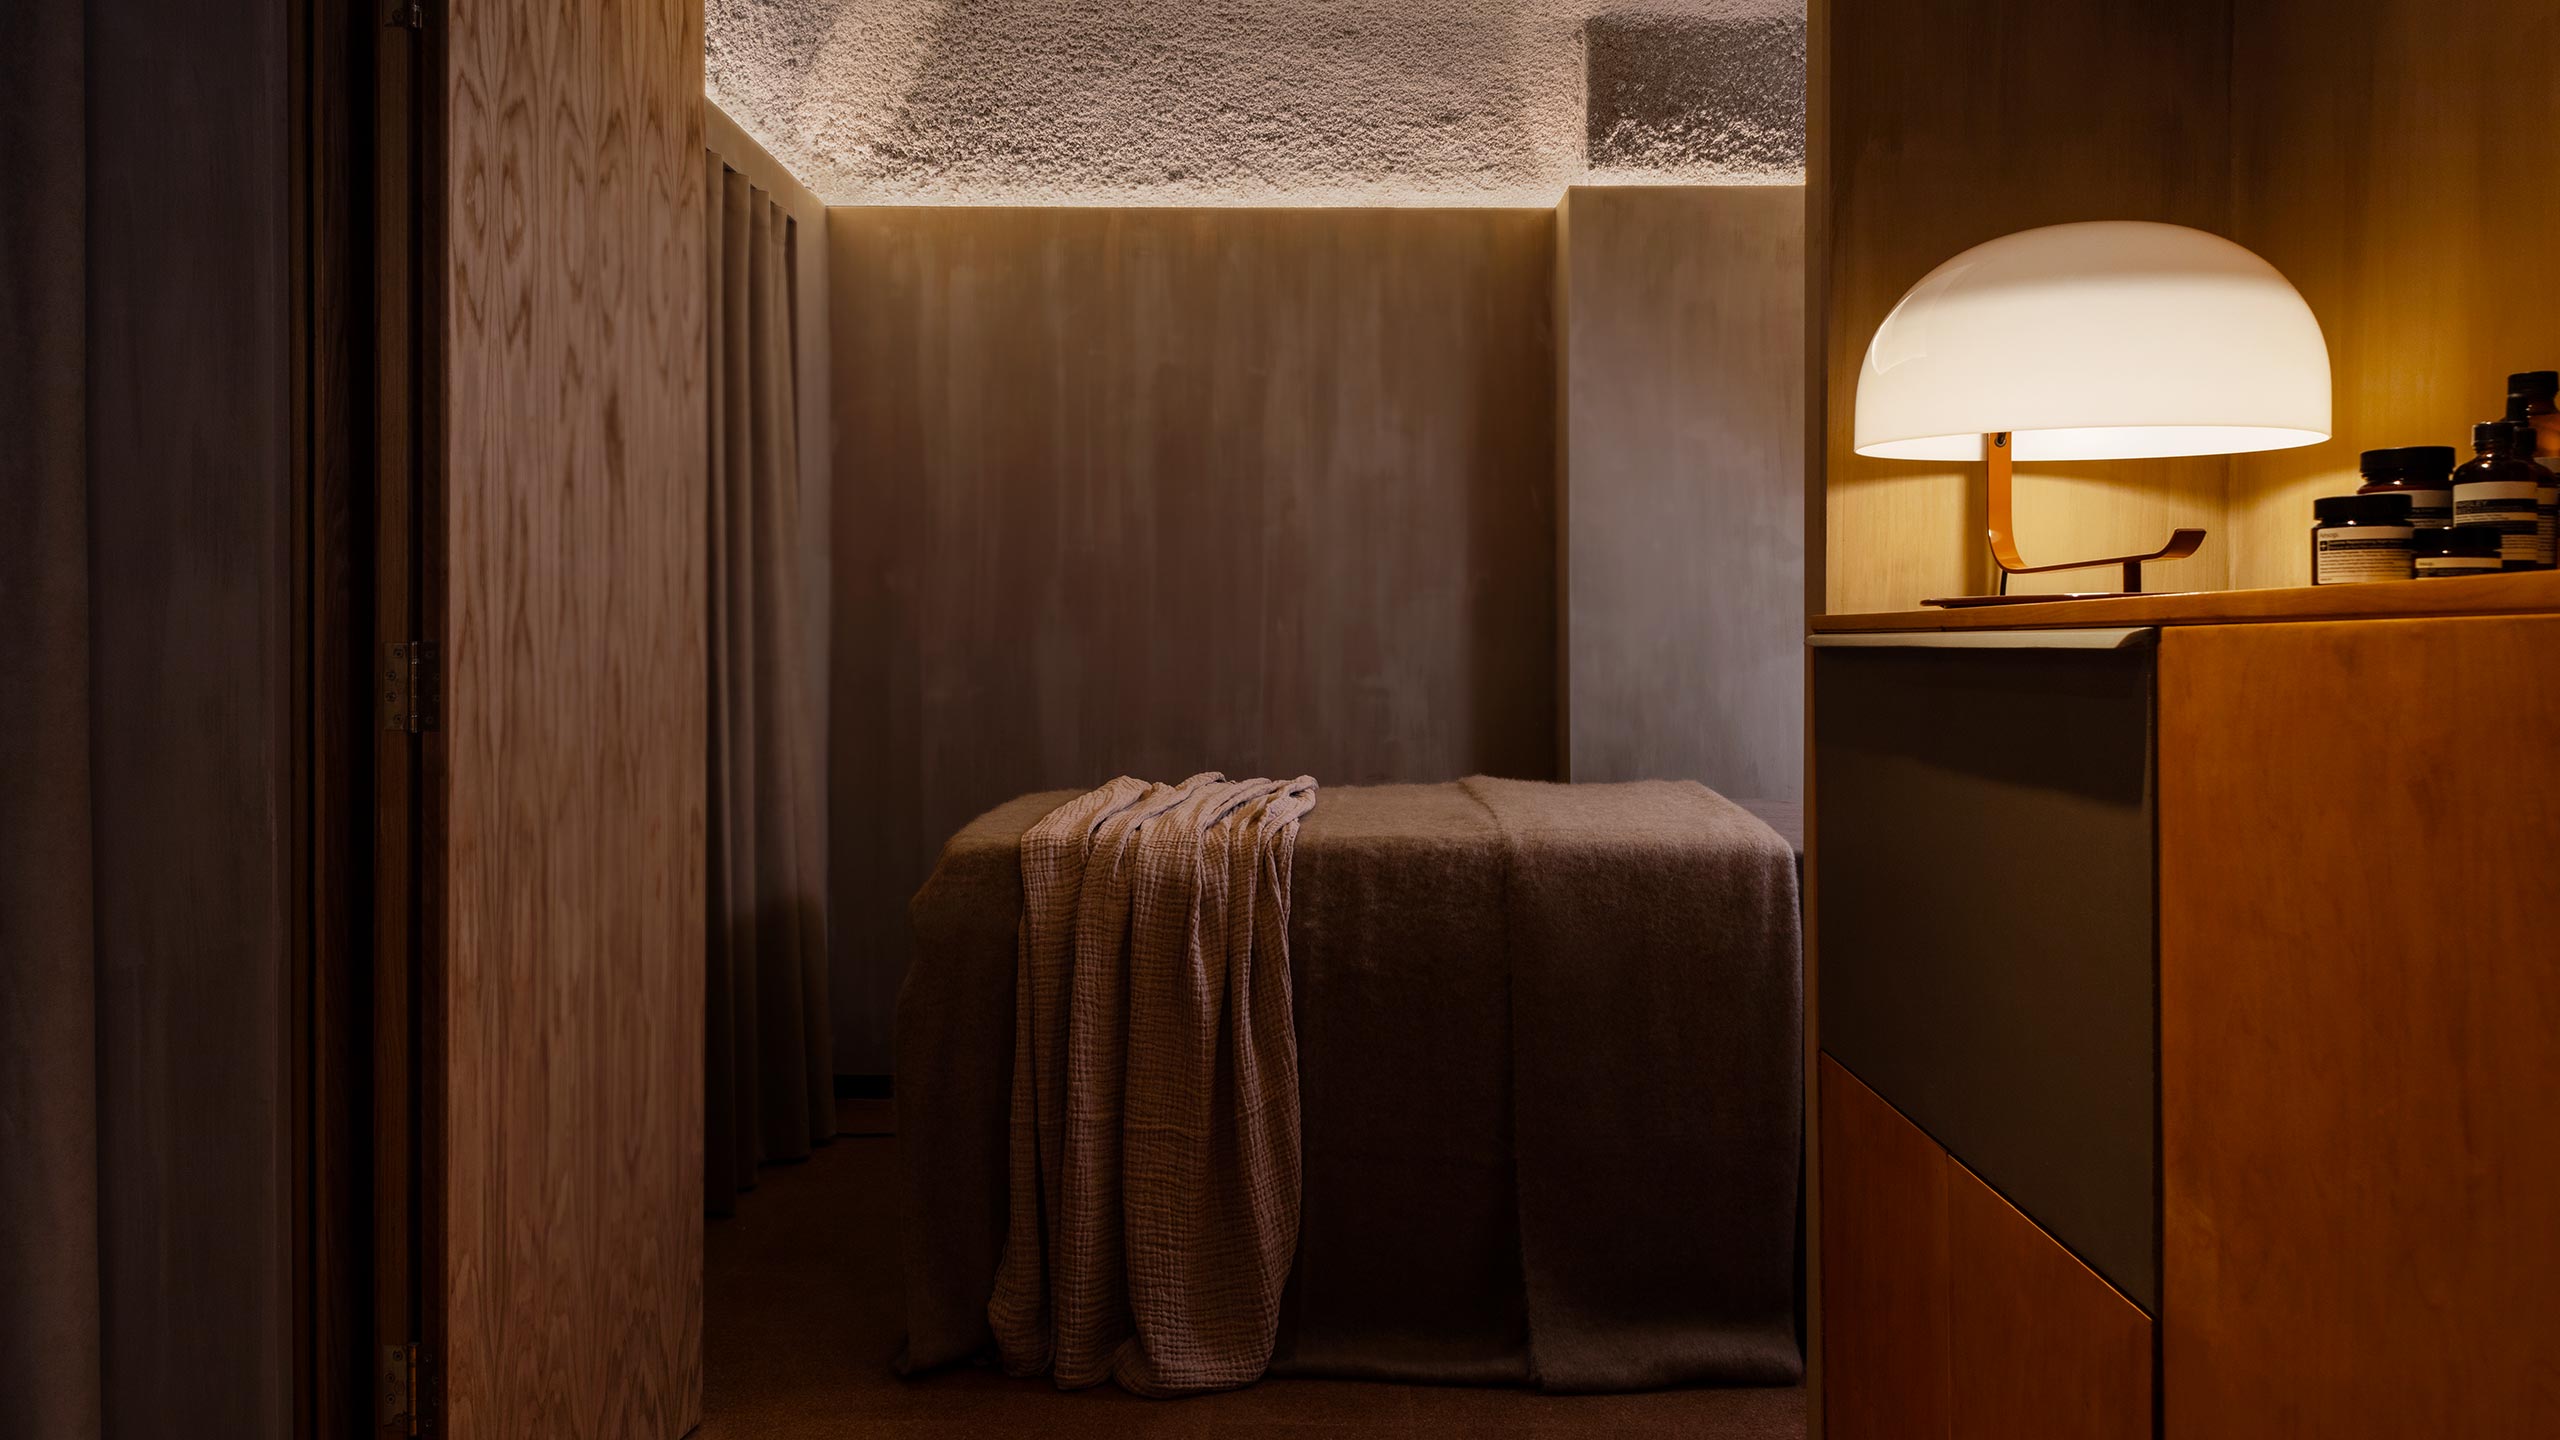 A dim-lit facial treatment space; a bed sitting in the centre of a room.